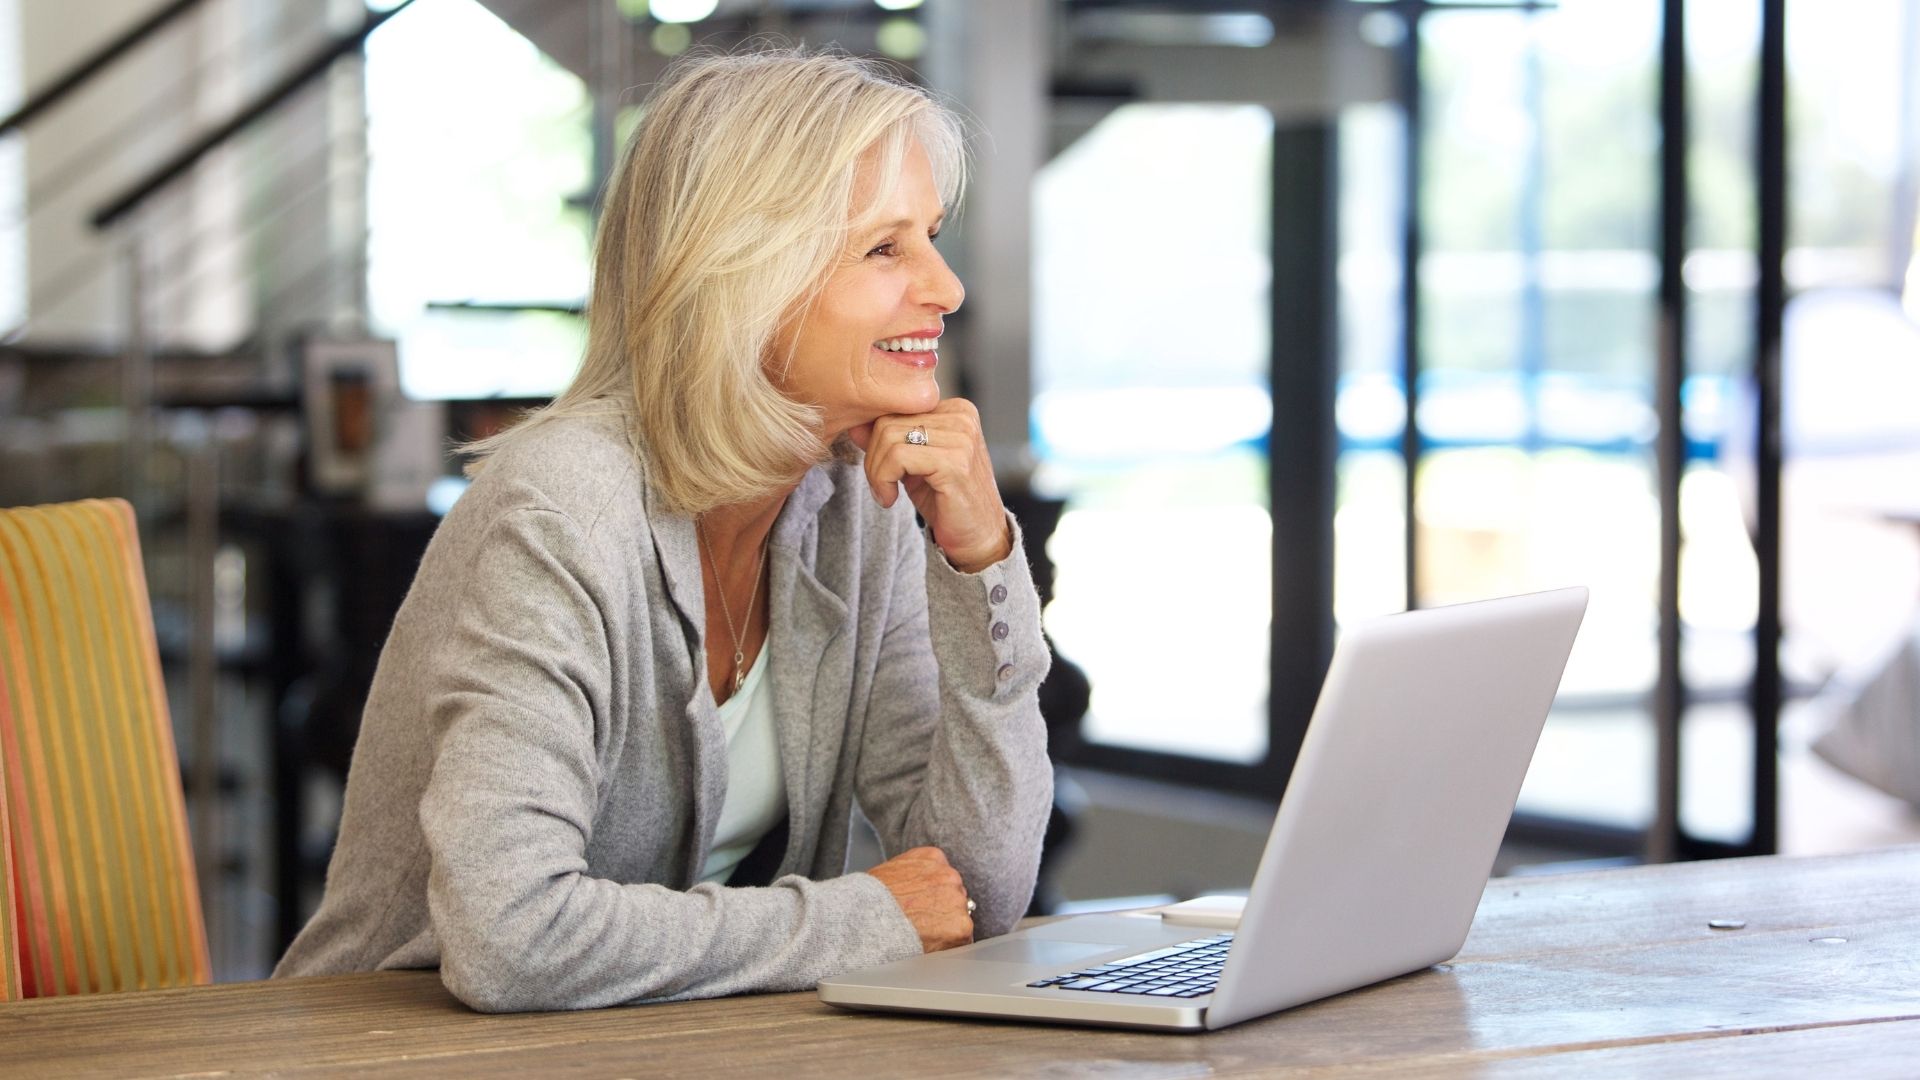 Why Digital Inclusion is Important for Older Workers